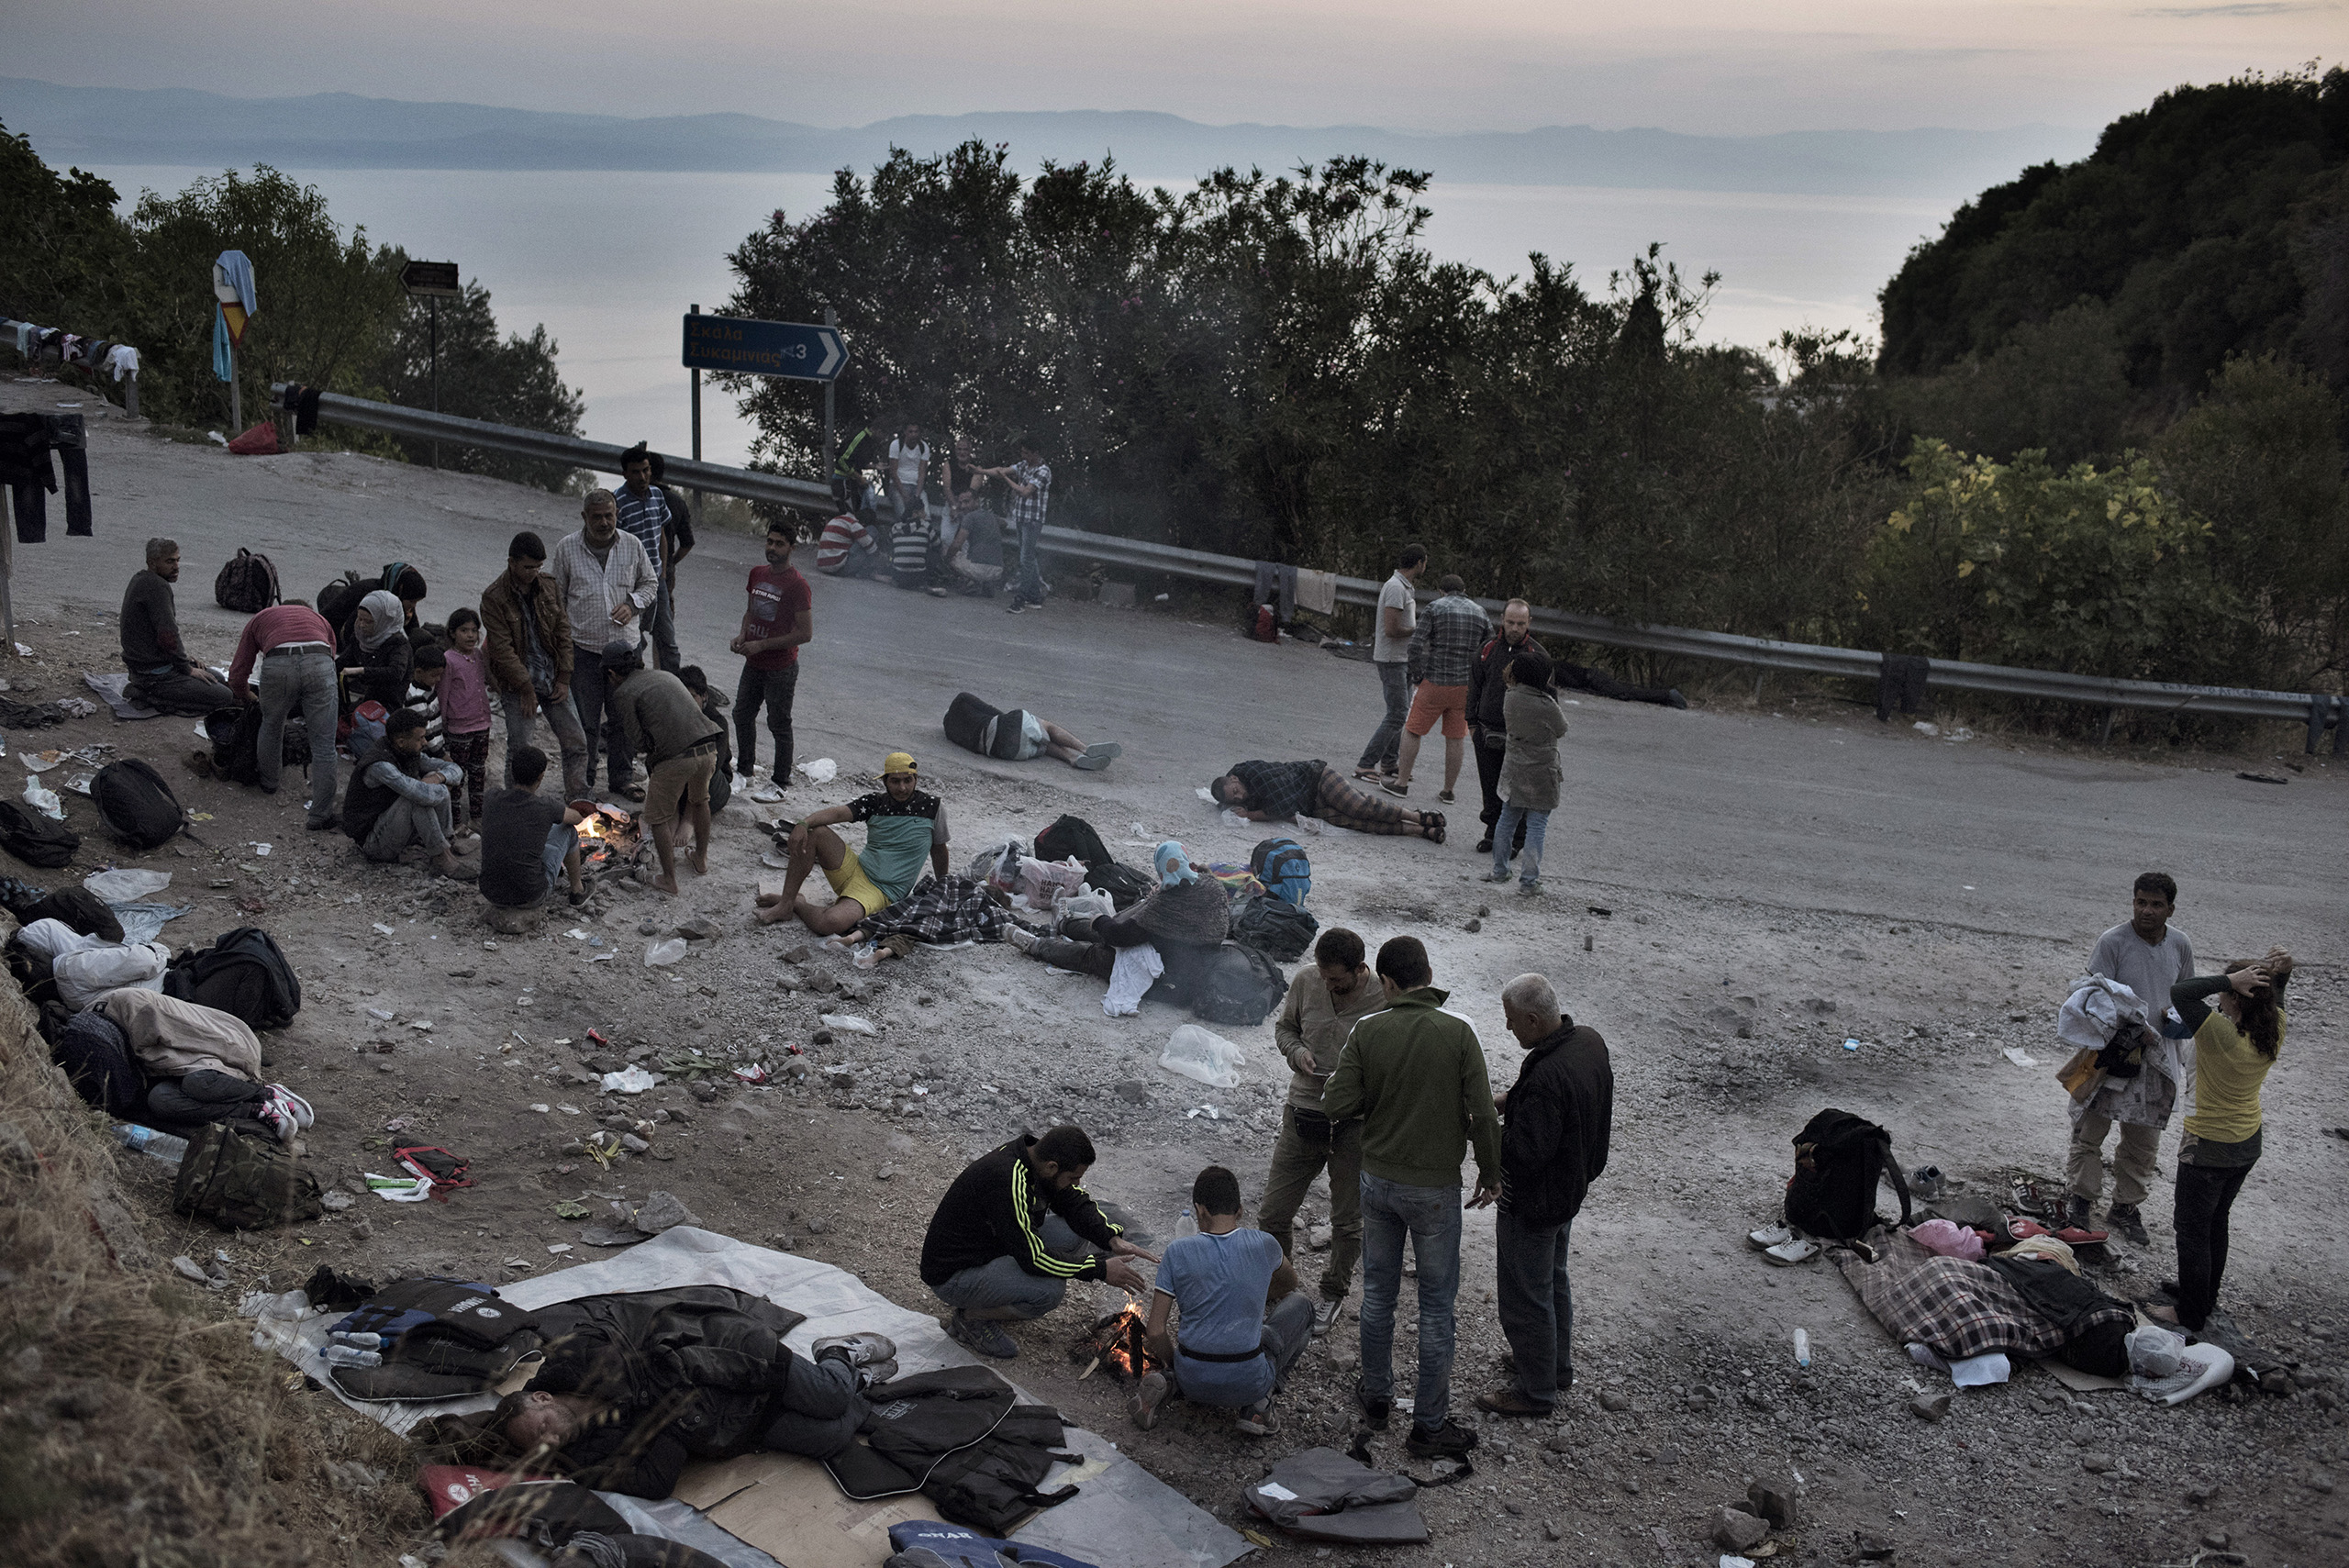 Migrants rest in makeshift camps on the roadside as they make their way on foot across the Greek island of Lesbos, the first piece of European land they reached after crossing in rickety boats from neighboring Turkey.